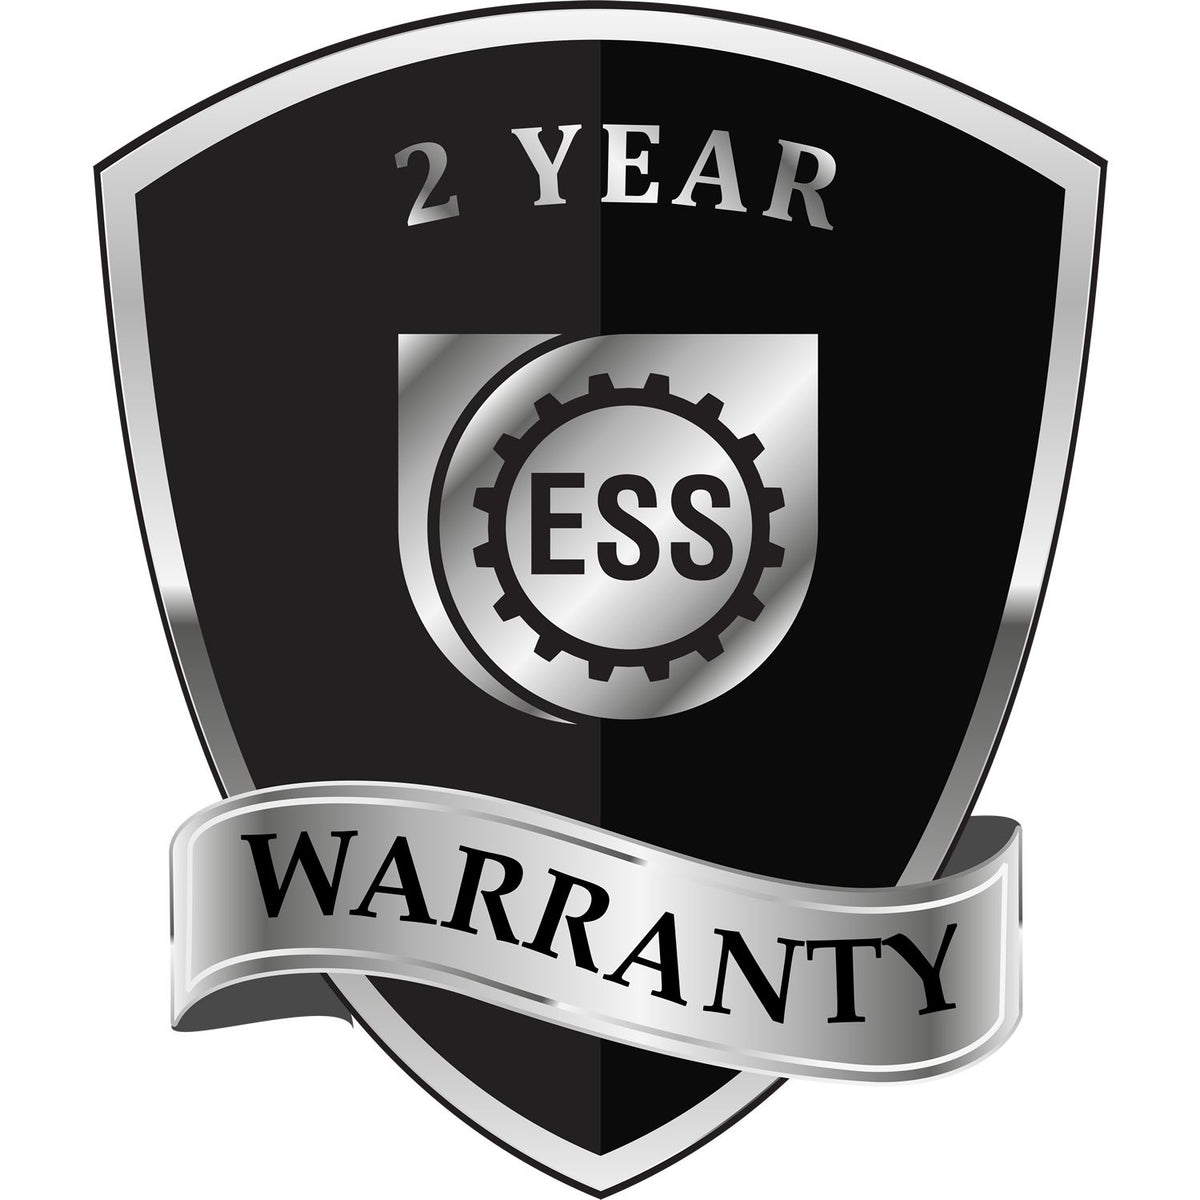 A badge or emblem showing a warranty icon for the Montana Engineer Desk Seal